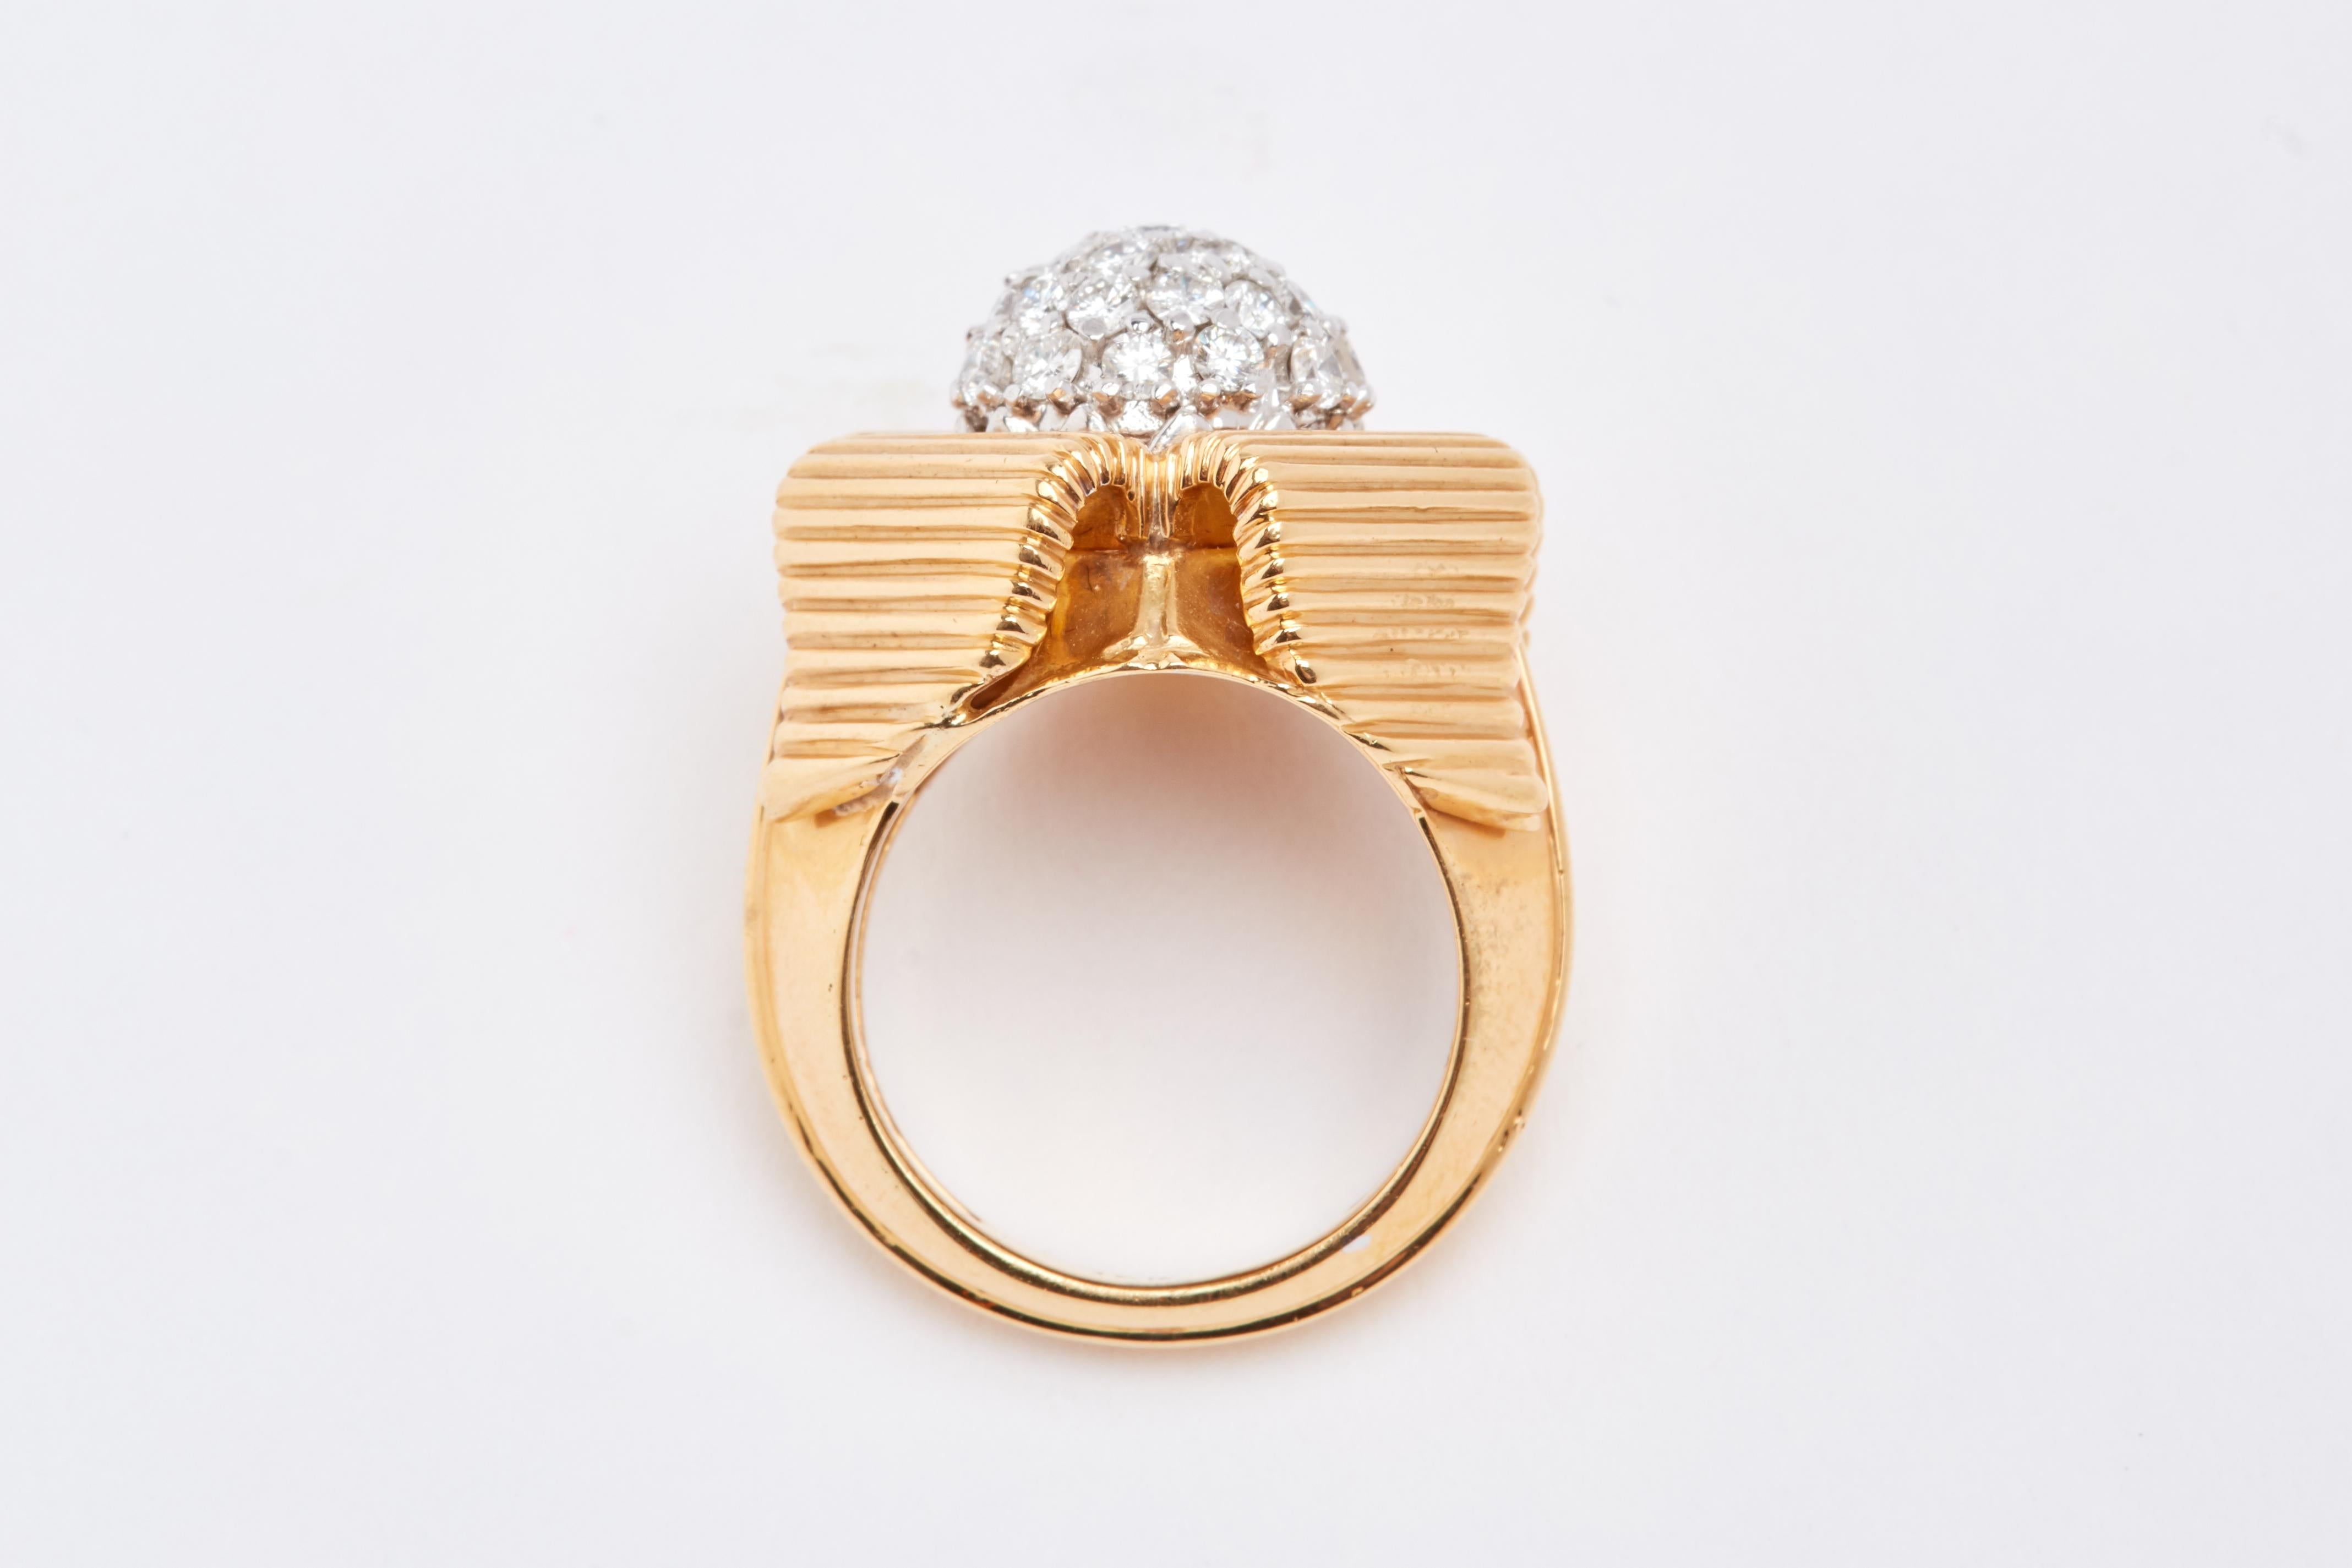 18K Yellow Gold Dome Cluster Geometric Ring. Aprox 2.50 carats total of white diamonds. Size 7